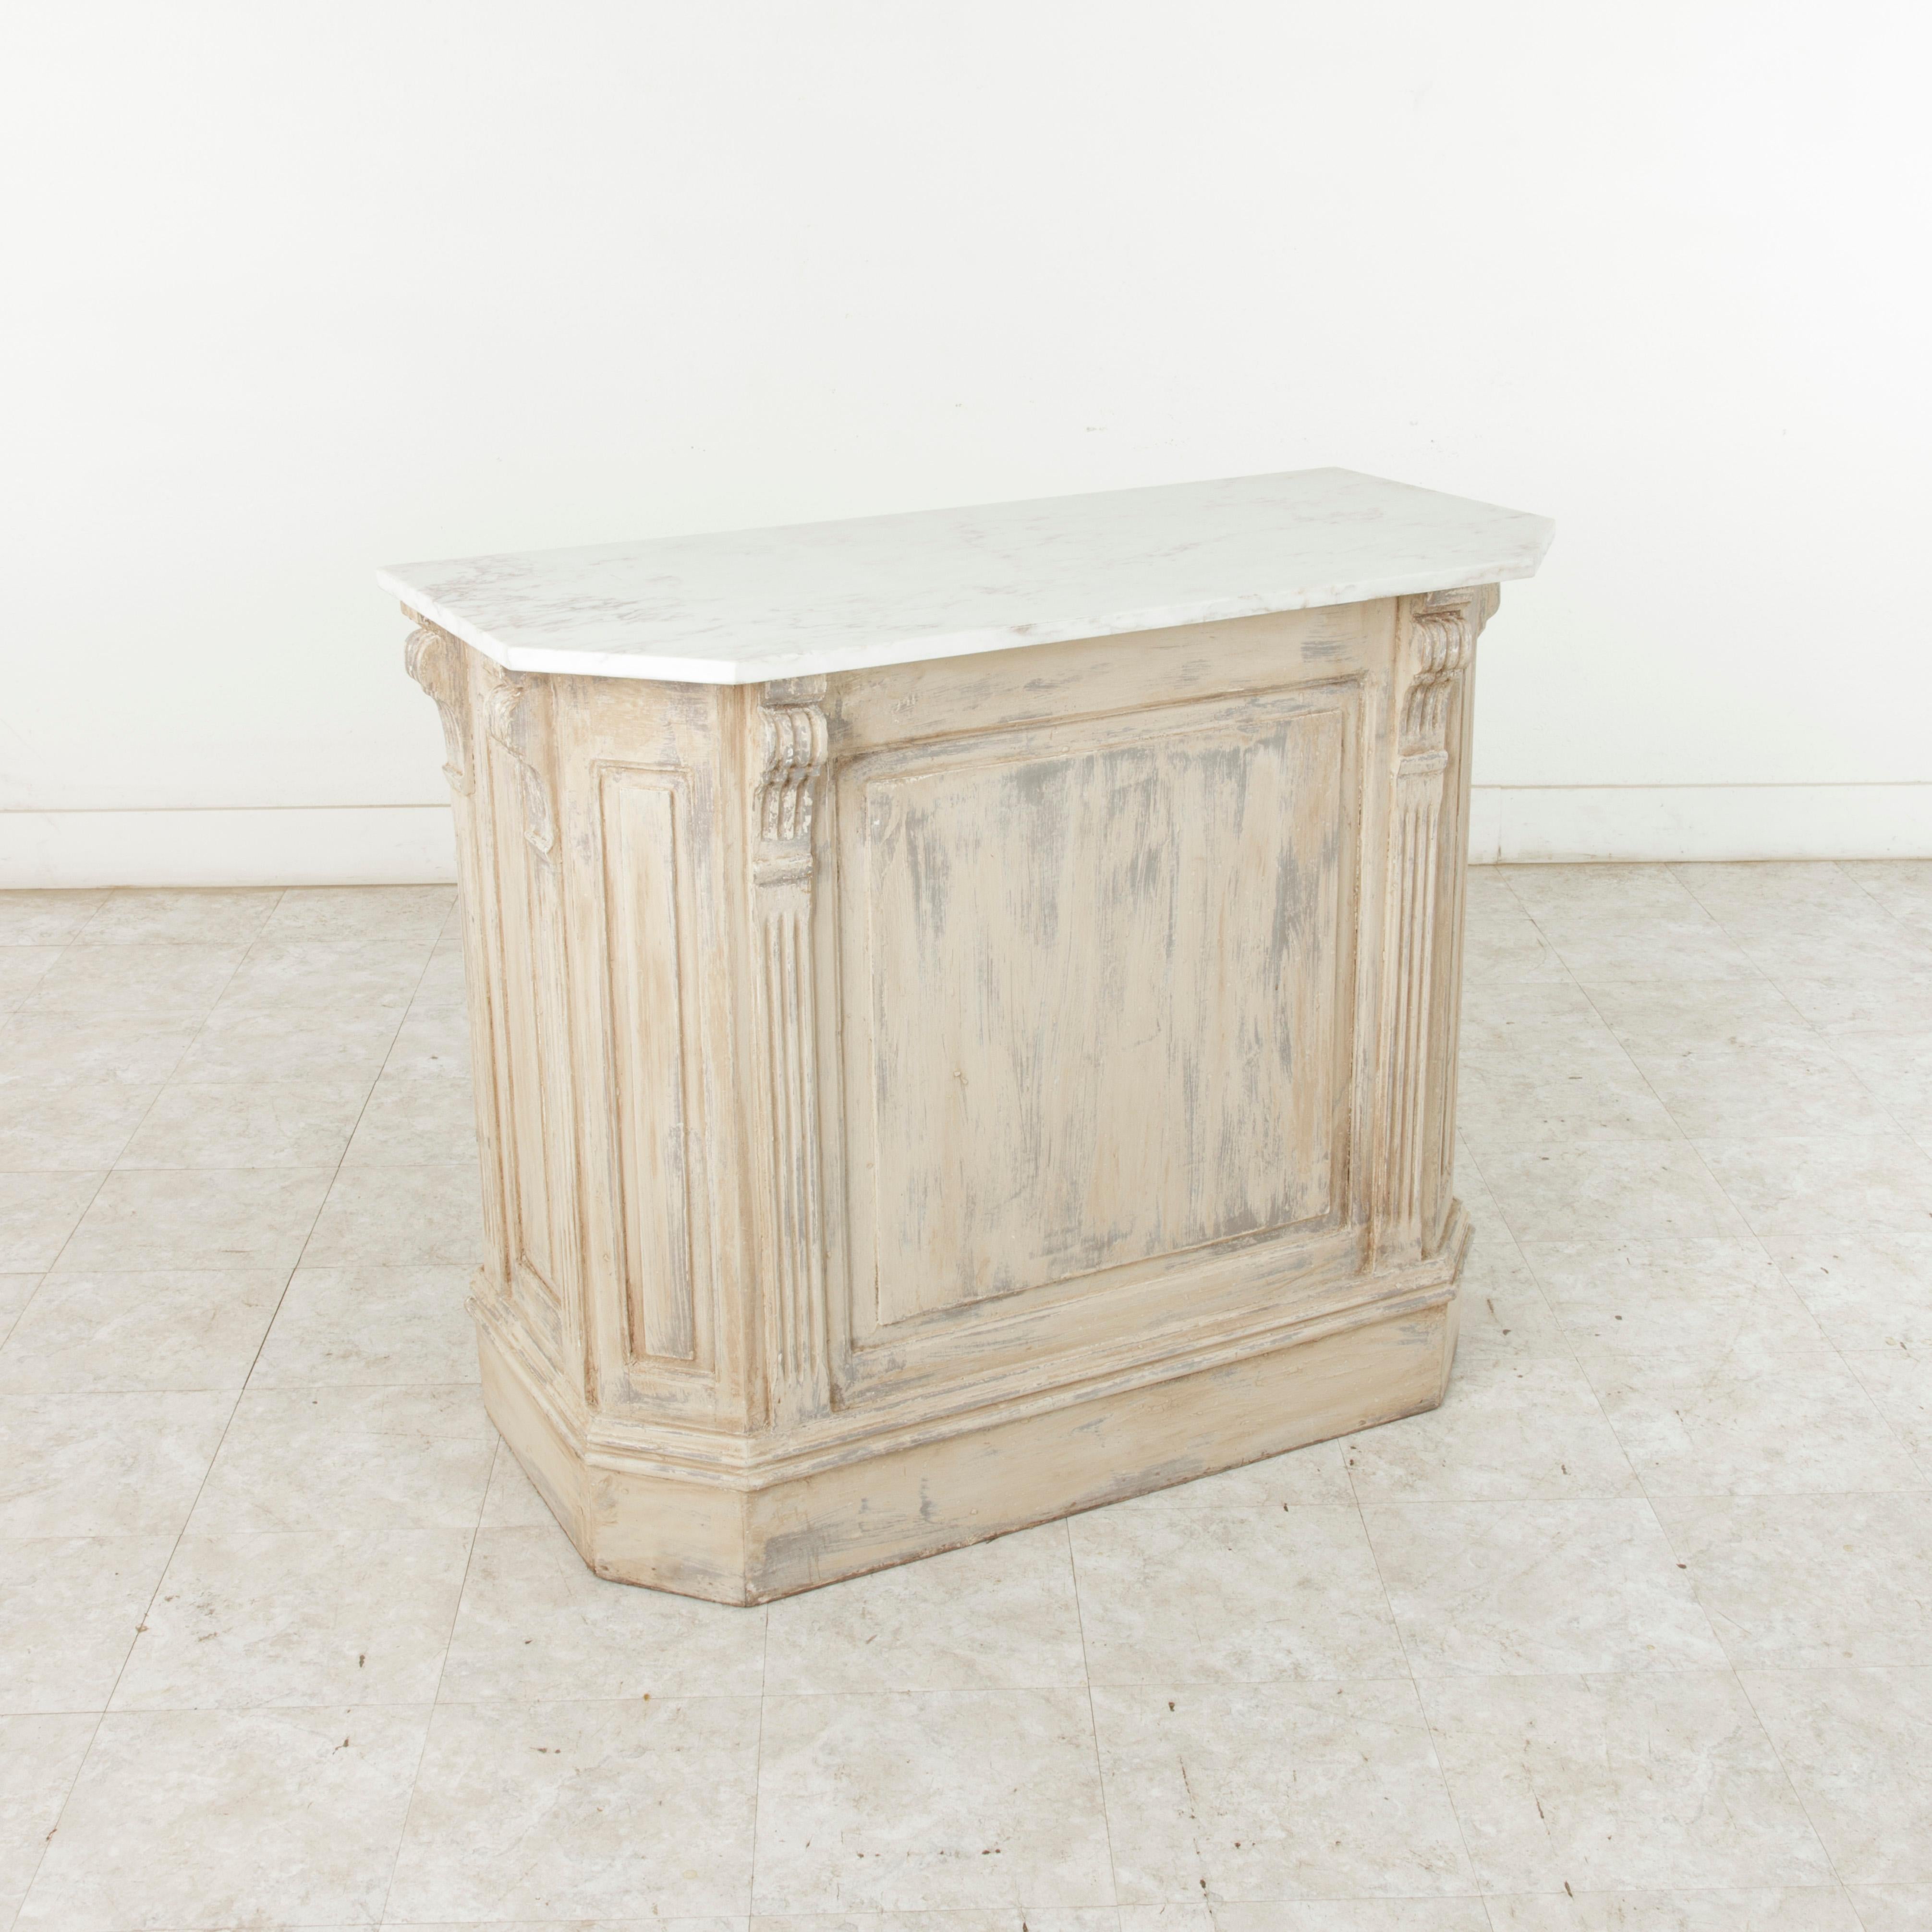 Found in Belgium, this painted counter features a veined white marble top. Six fluted half-columns flank the panels of each side of the cabinet. Two shelves at the backside provide storage space for glassware and bottles. With its marble top and